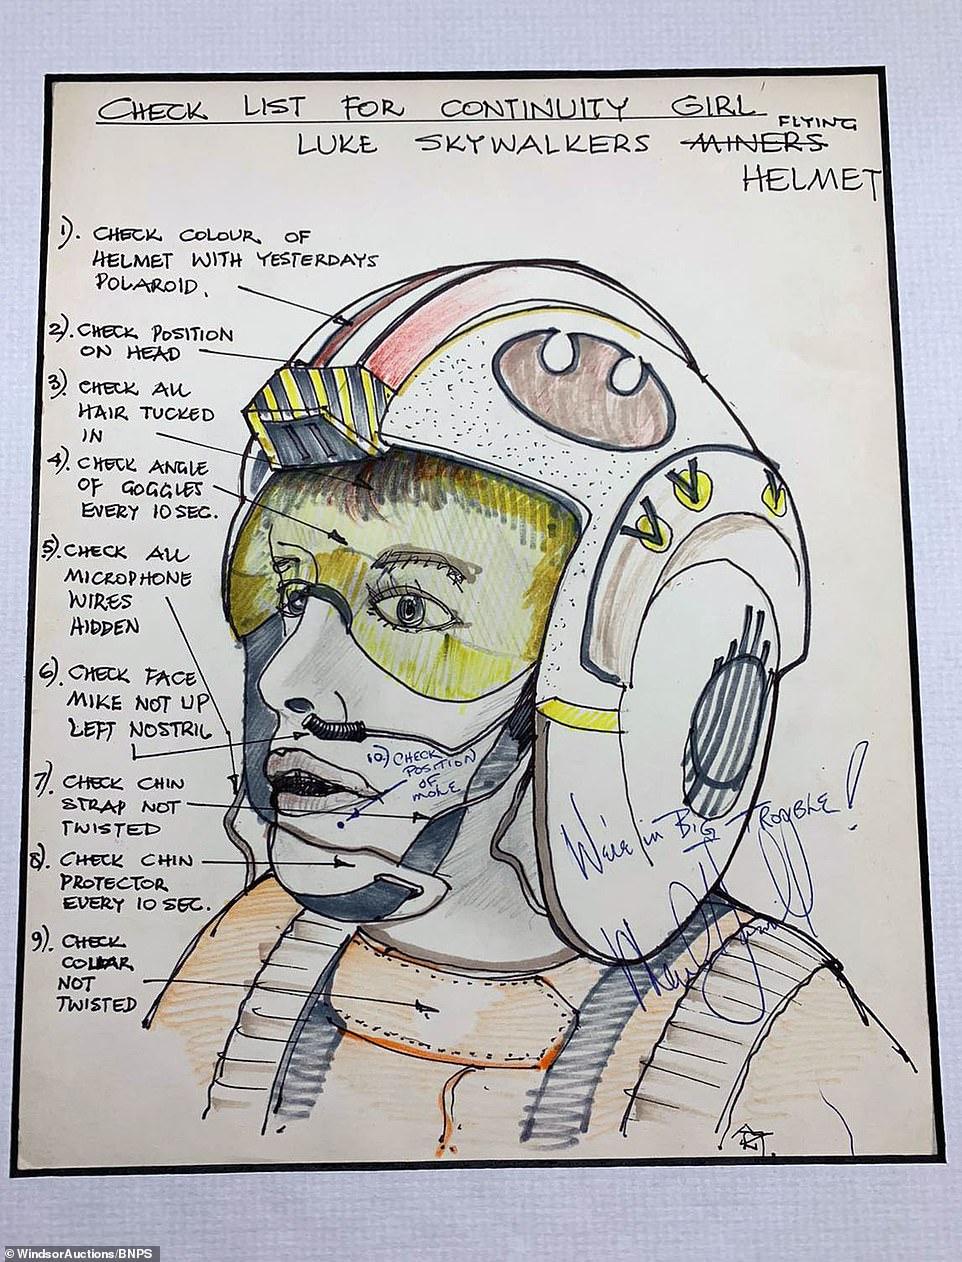 cartoon - Check List For Continuity Girl Flying Luke Skywalkers Aainers Helmet Check Colour Of Helmet With Yesterdays Polaroid 2. Check Position On Head 13. Check All Hair Tucked On 4. Chetl Angle Of Goggles Every 10 Sec. 5.Check Au Microphone Wires Aidde